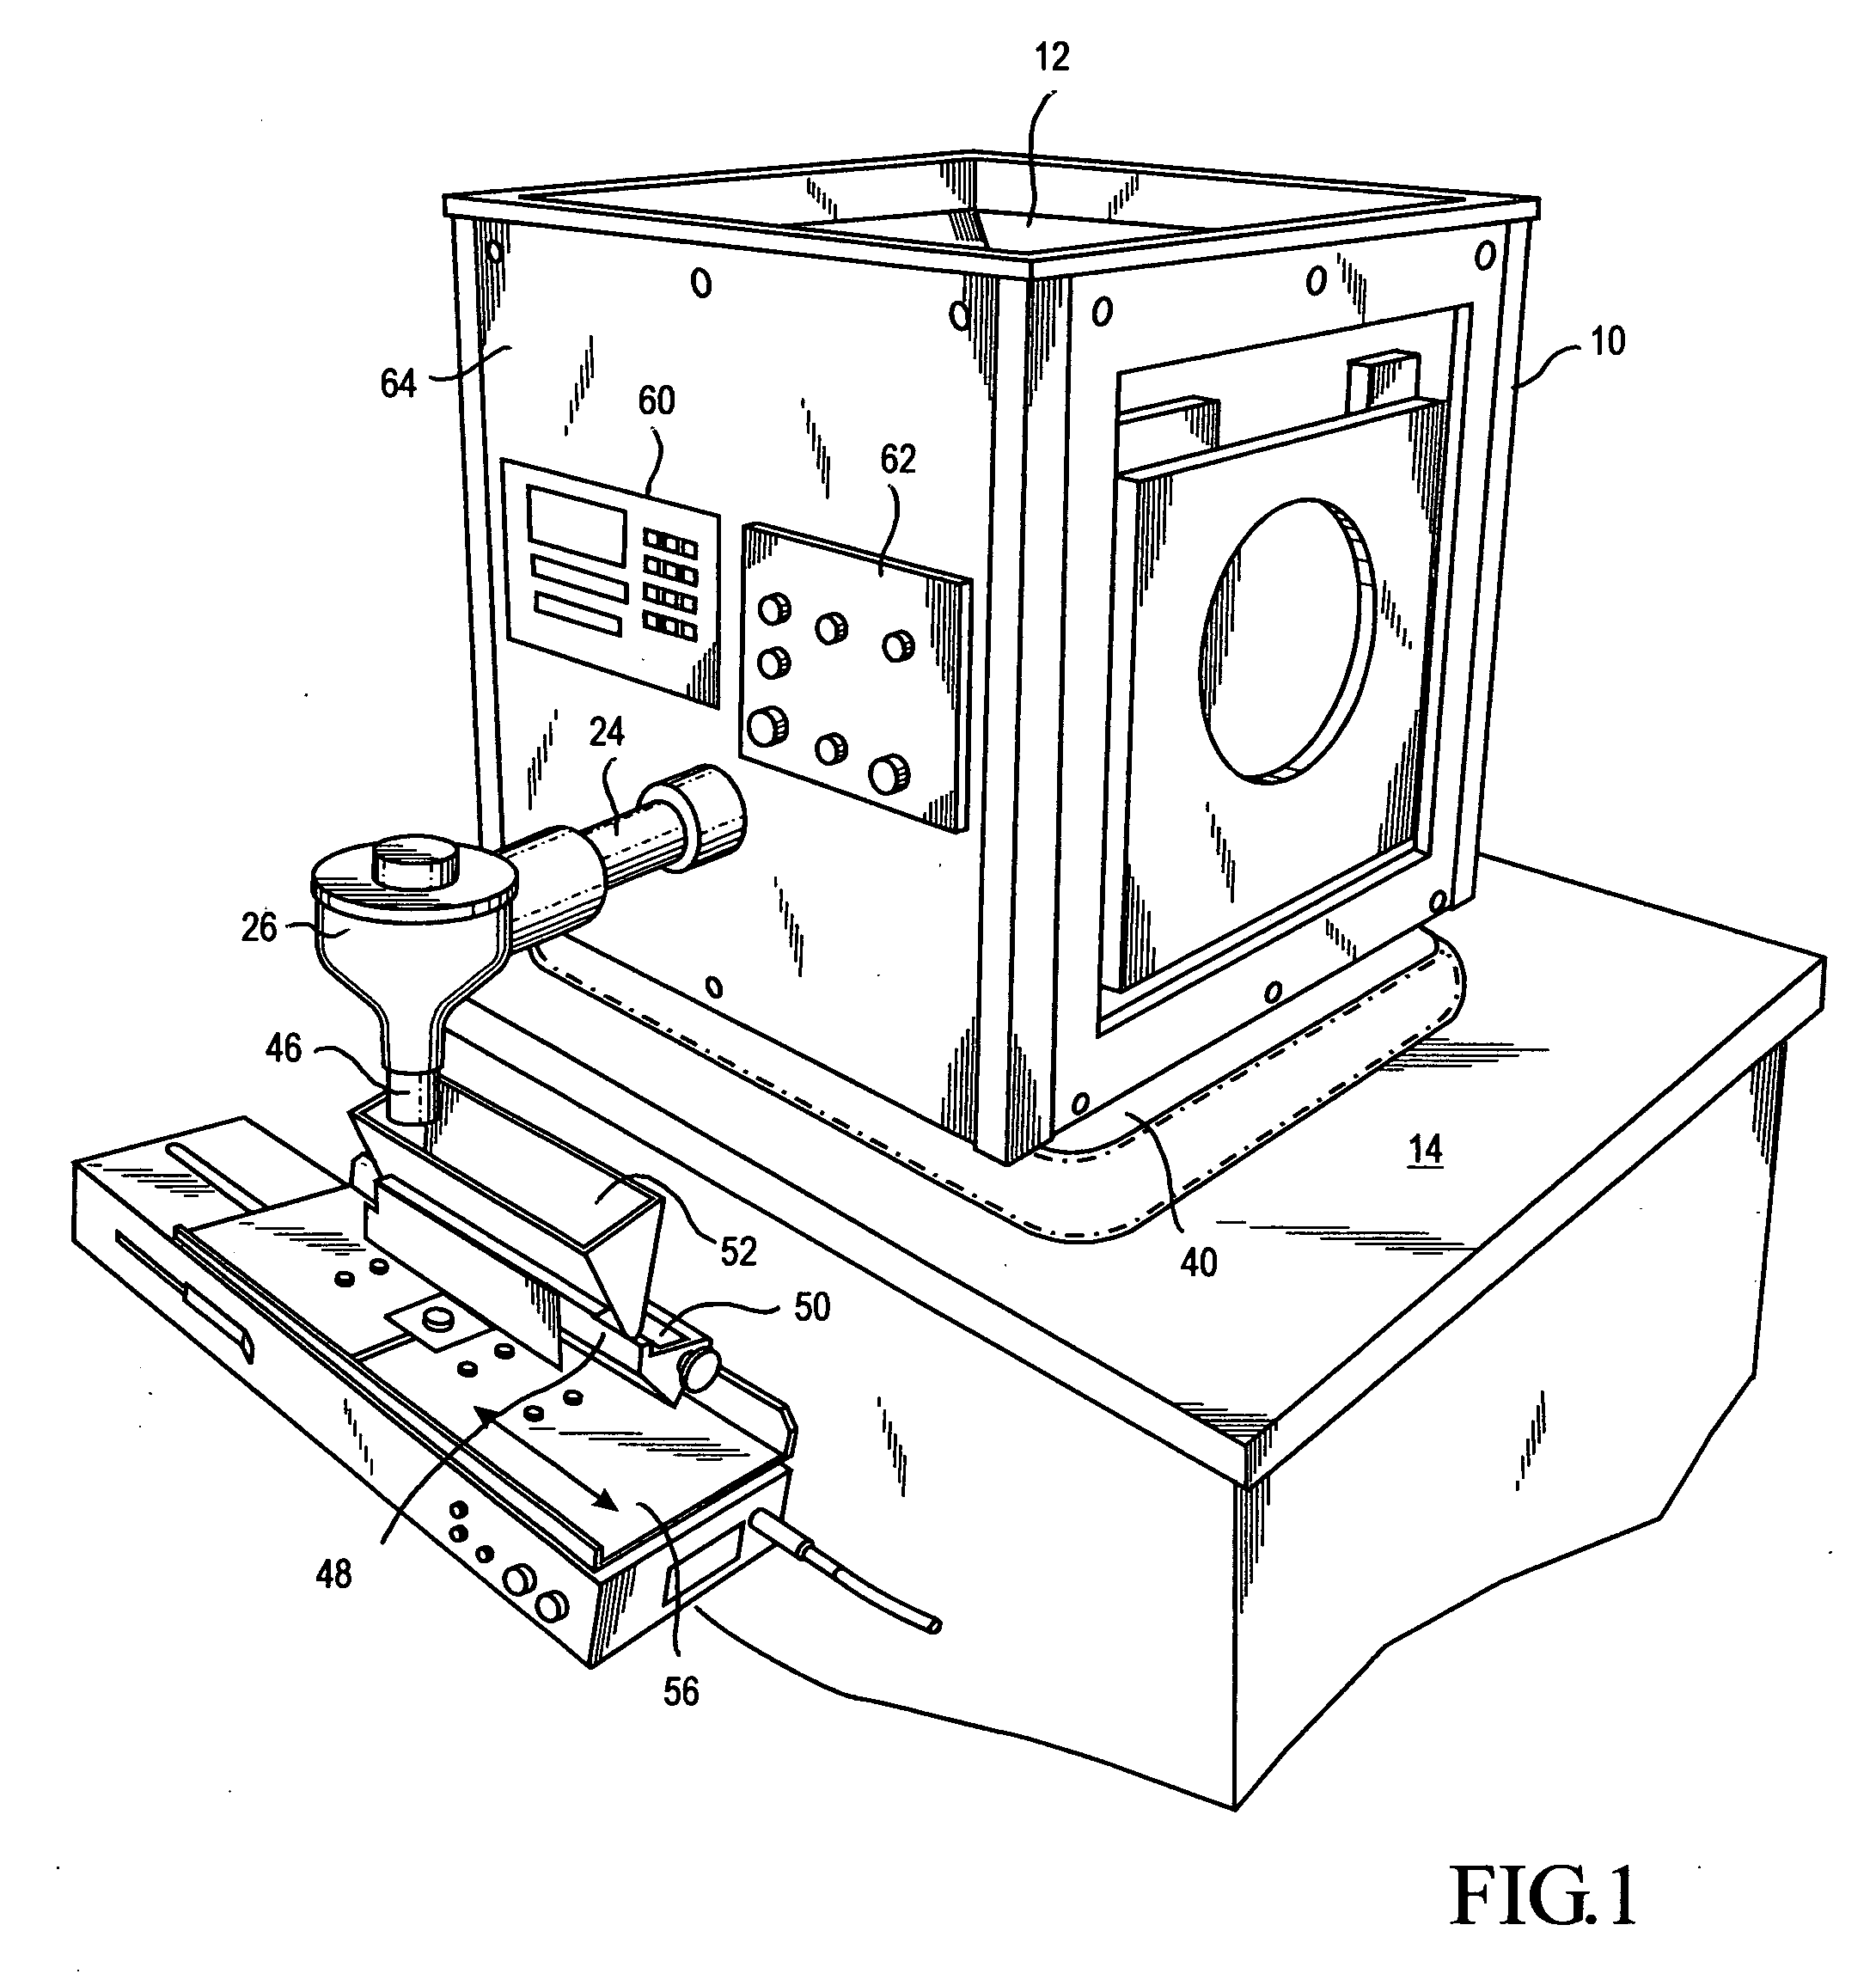 Apparatus and method for handling particulate material